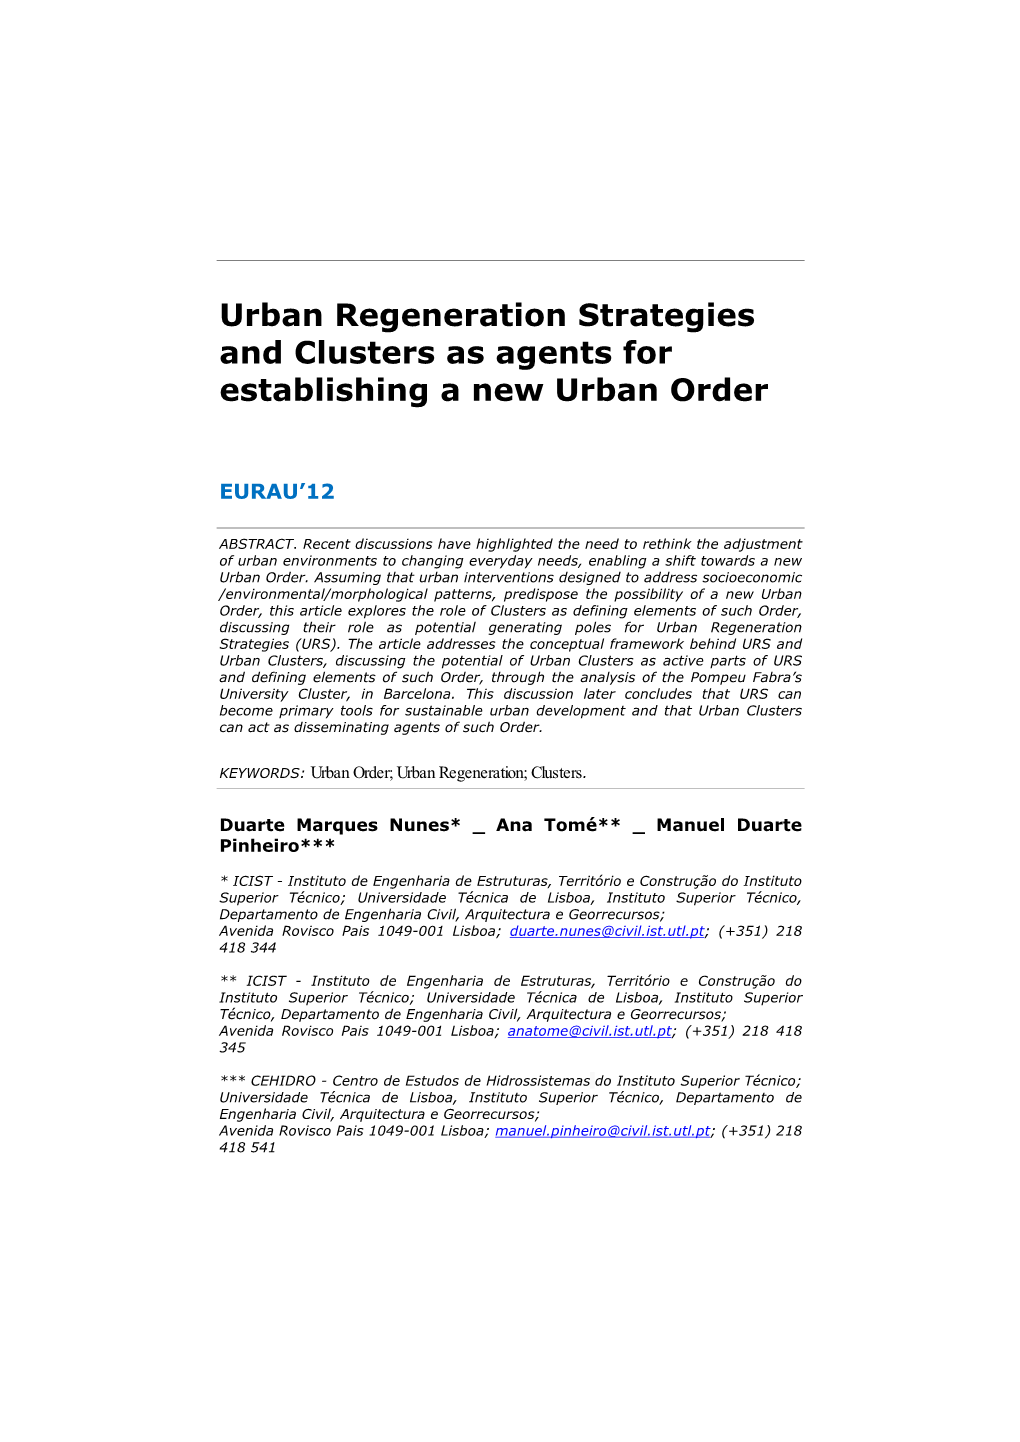 Urban Regeneration Strategies and Clusters As Agents for Establishing a New Urban Order